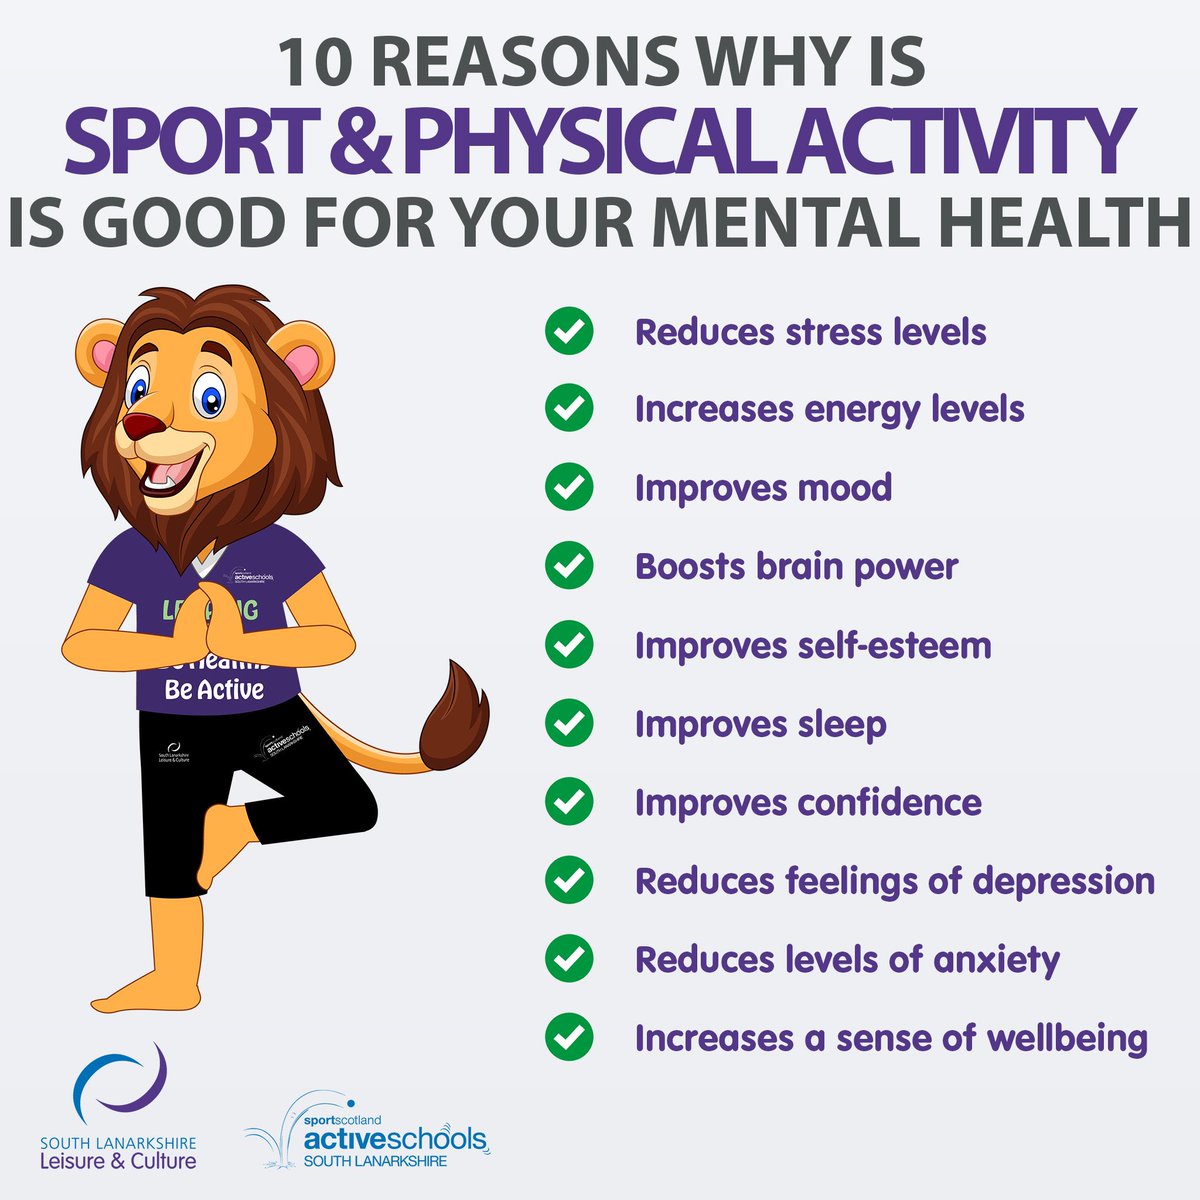 #PROFILE | Active Schools Mascot Leaping Leo with his 10 reasons why Sport & Physical Activity is good for your mental health… check out the list below! 😇🦁 #MentalHealthAwarenessWeek2023 #MentalHealthAwareness #ToHelpMyAnxiety @MentalHealthFN @sportscotland